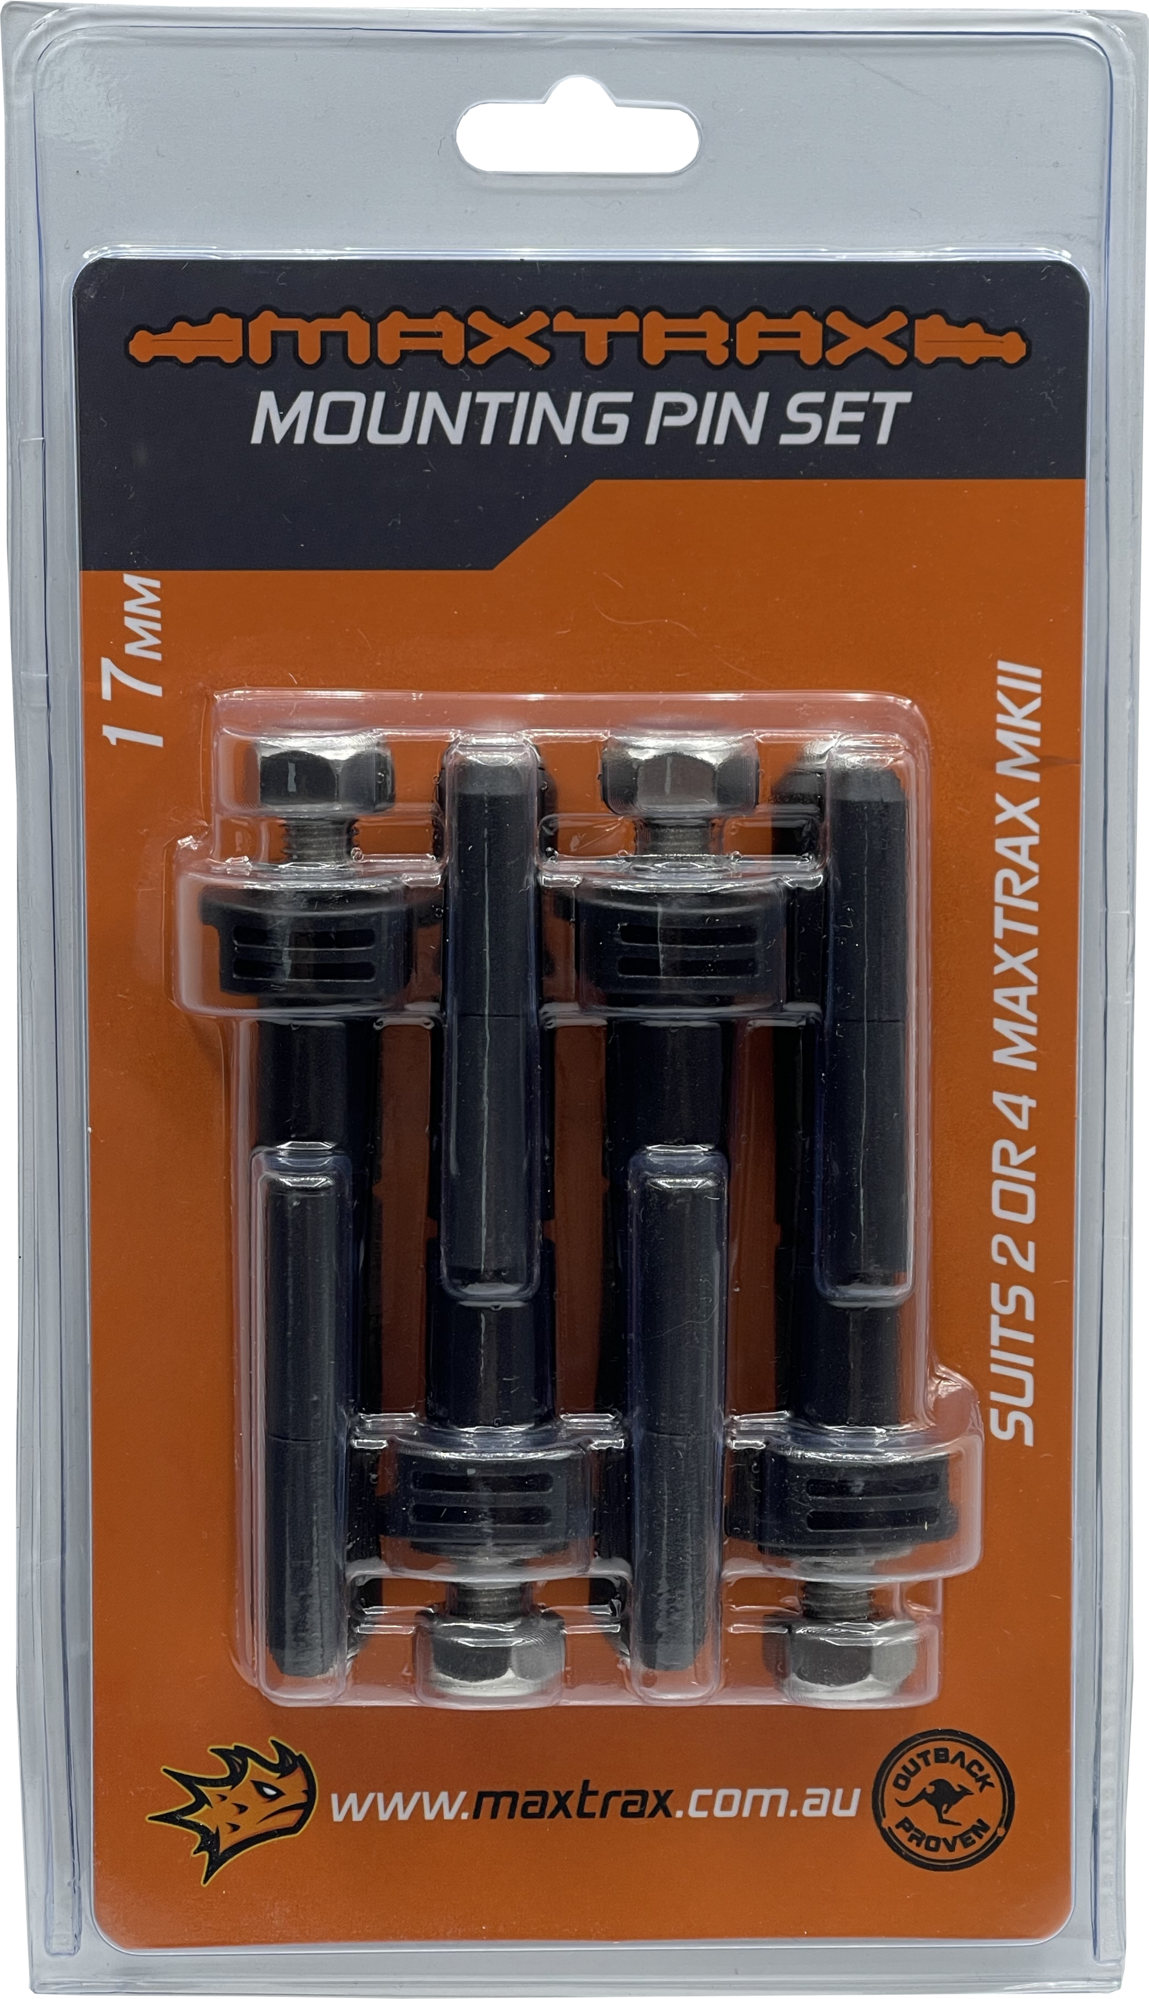 MAXTRAX Mounting Pin Set 17mm - Holds 2 or 4x MKII